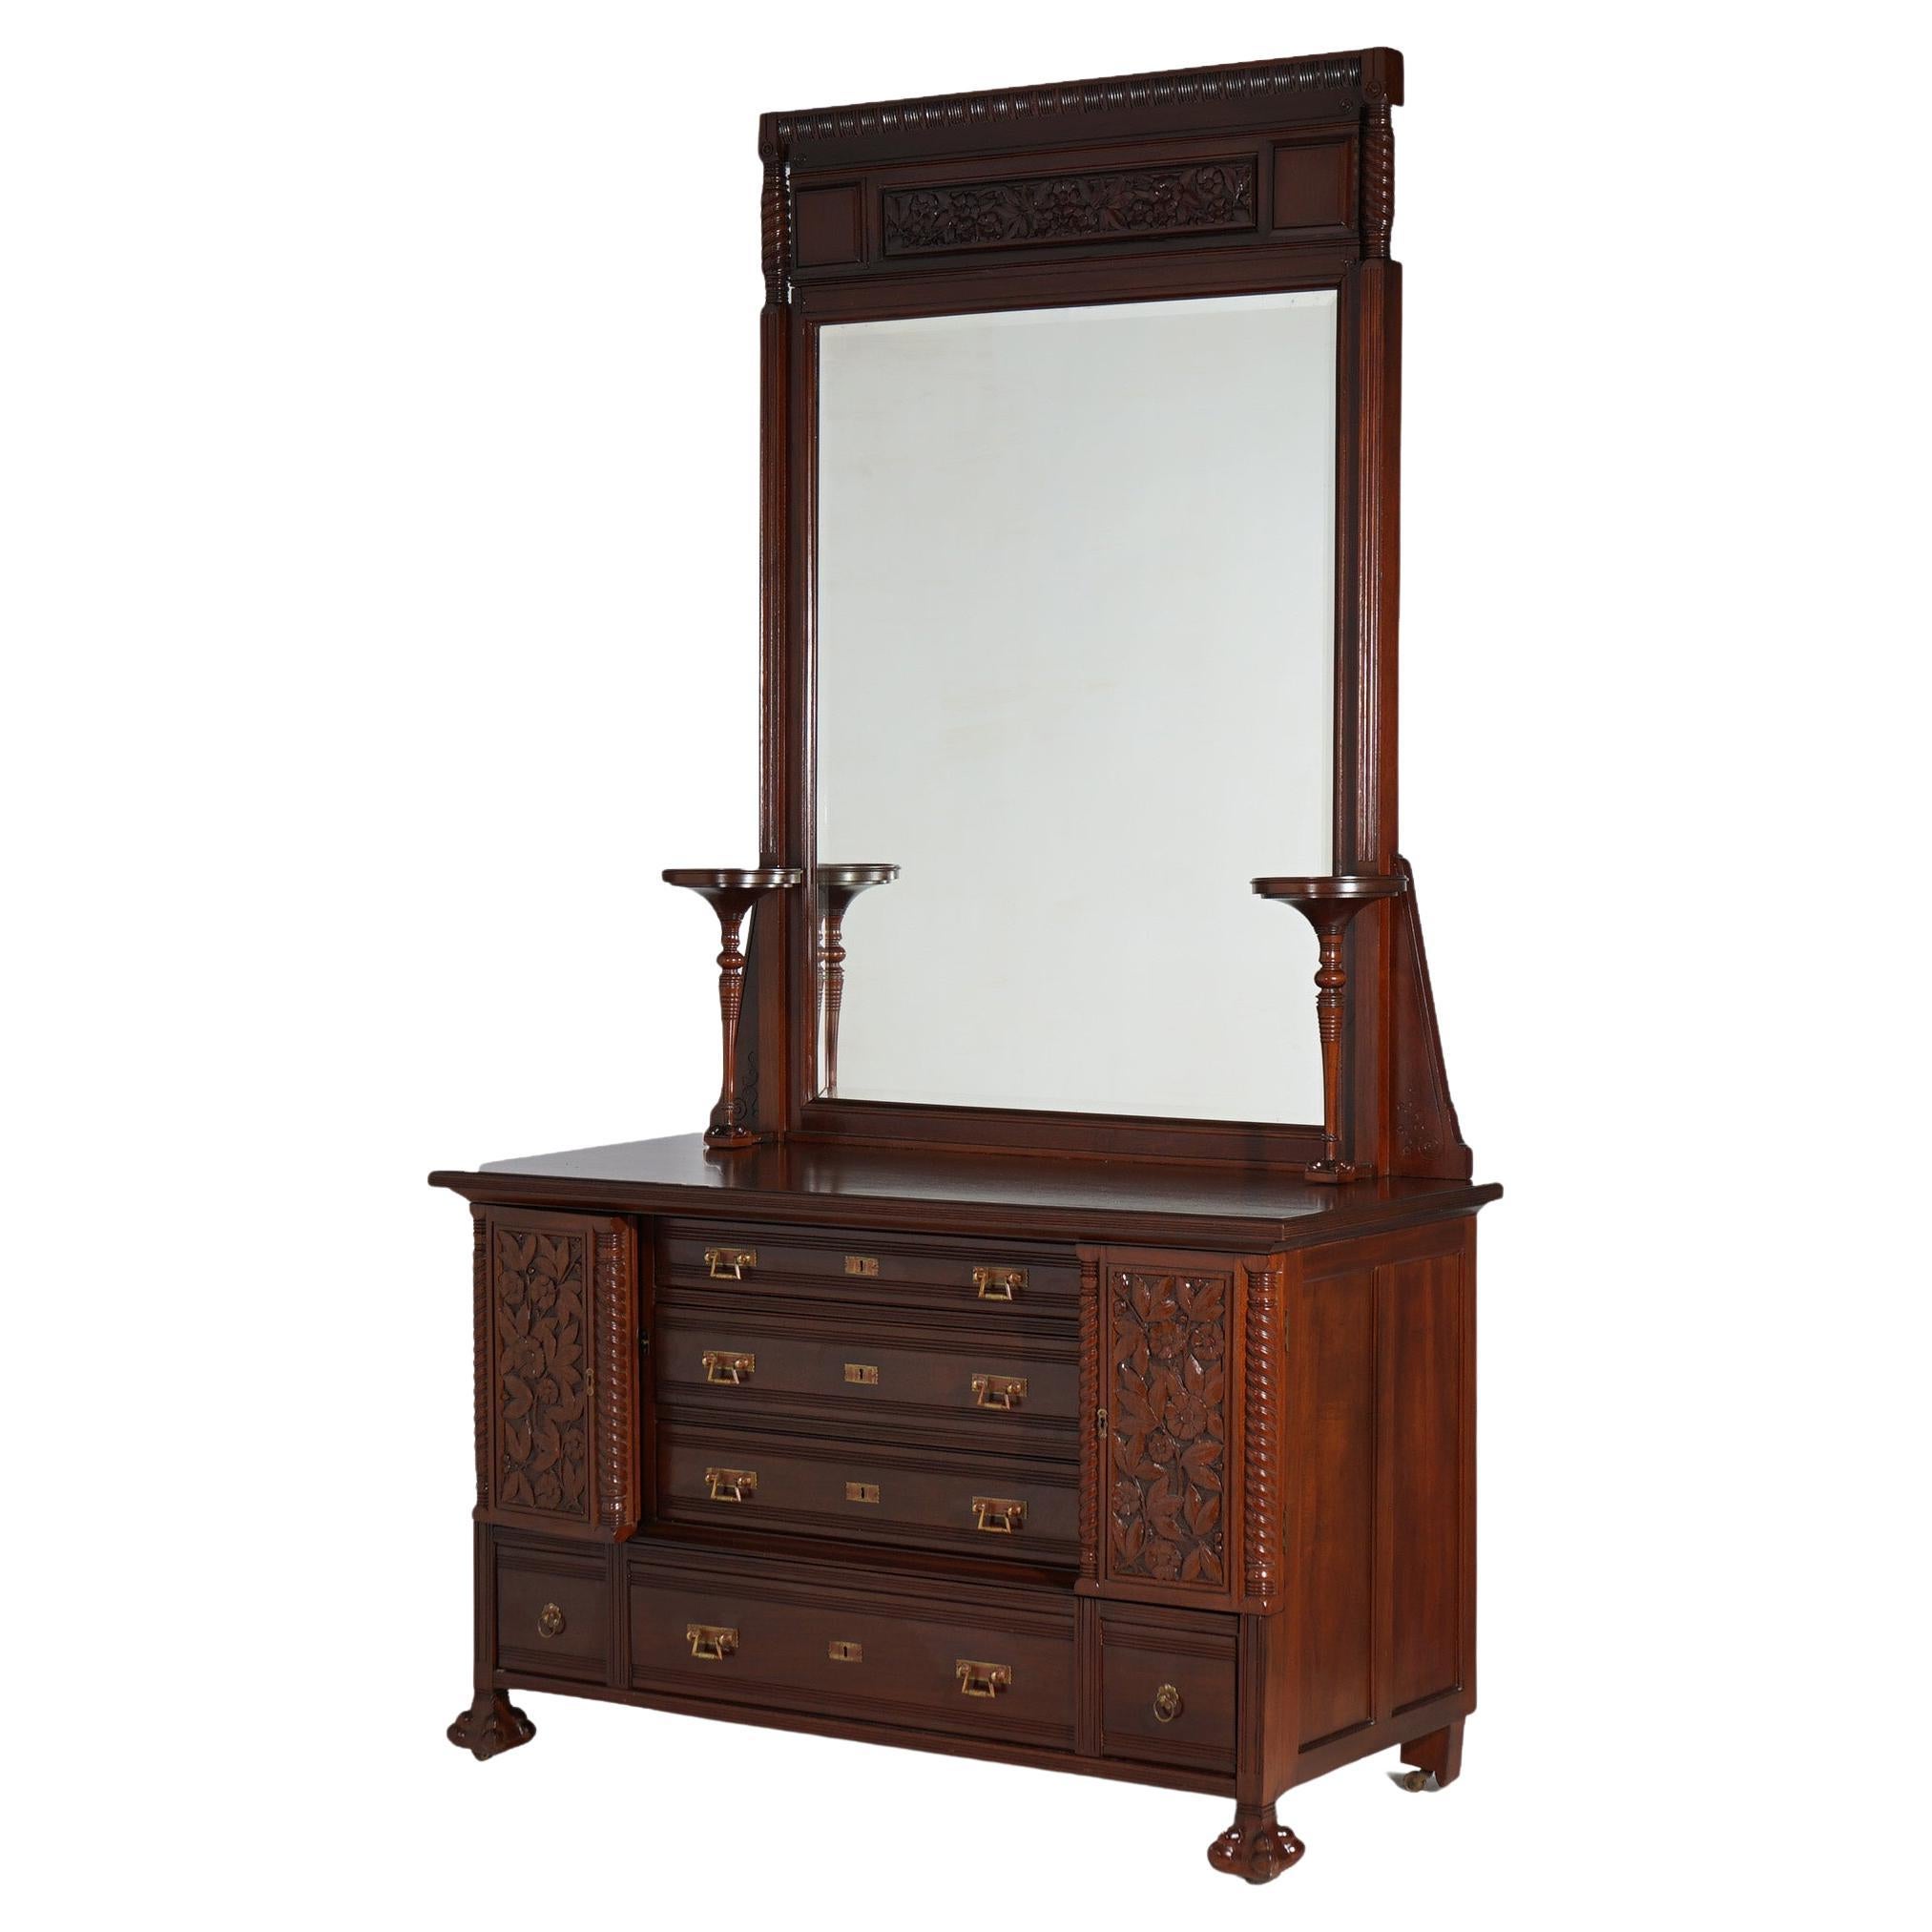 Antique Aesthetic Carved Mahogany Dresser with Mirror, circa 1890